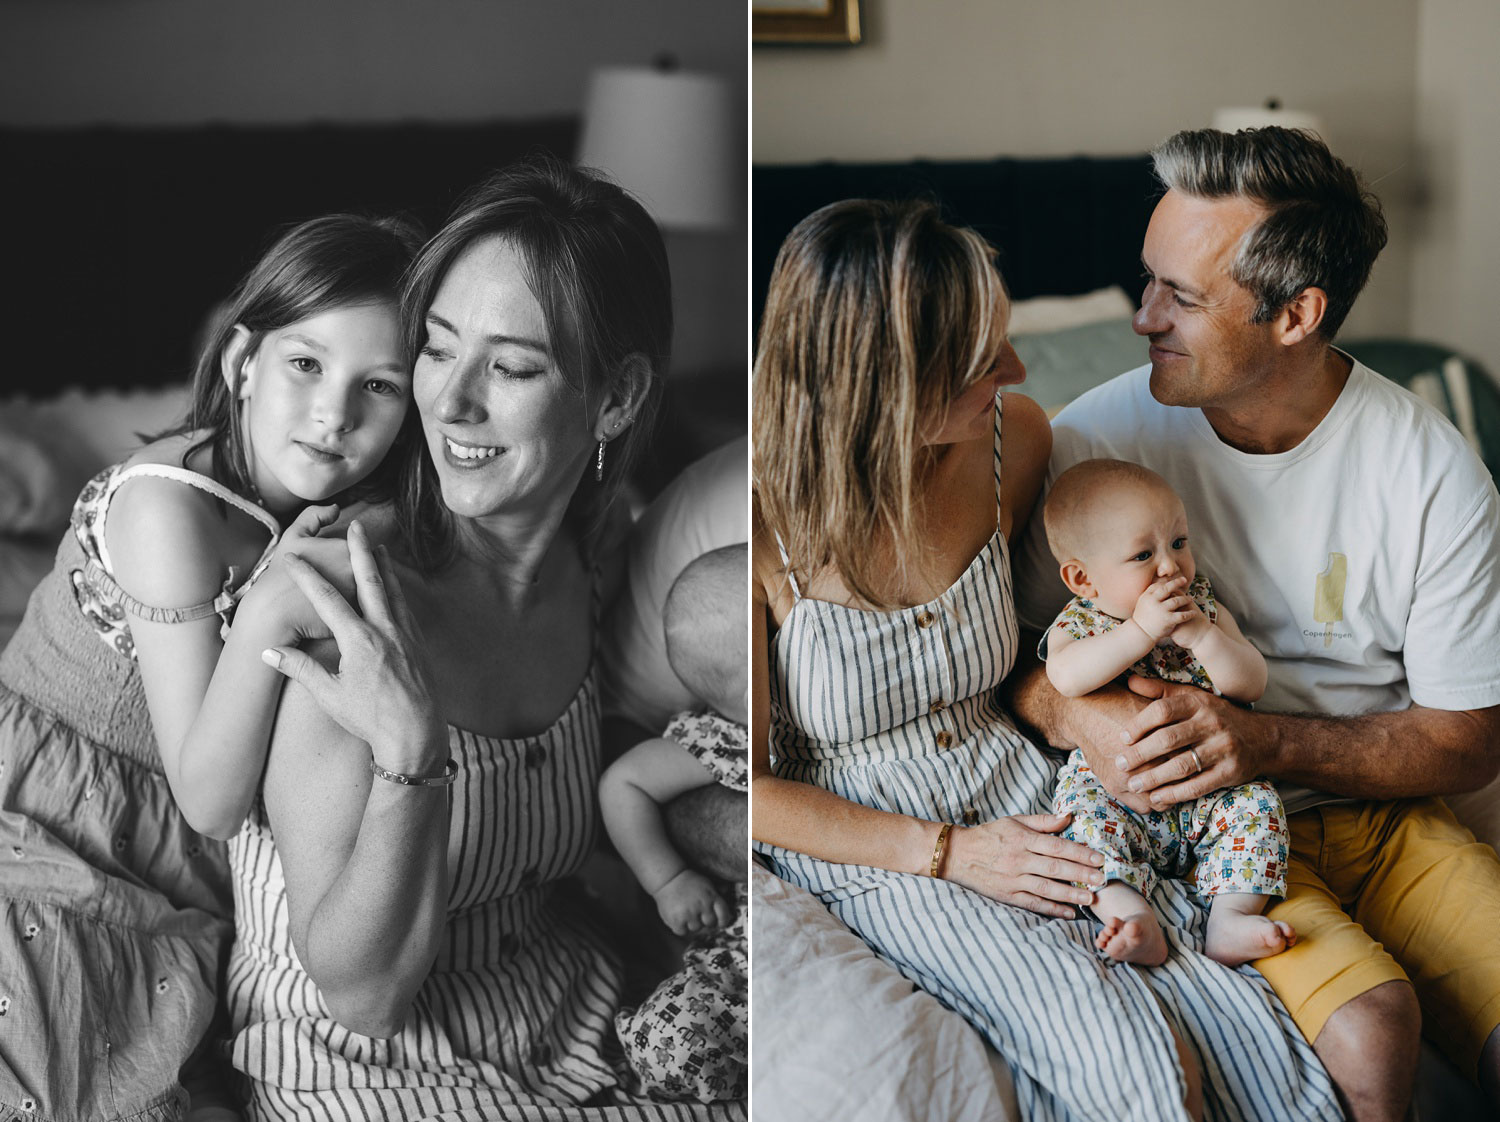 Loving parents holding their baby during an intimate home photoshoot in Copenhagen